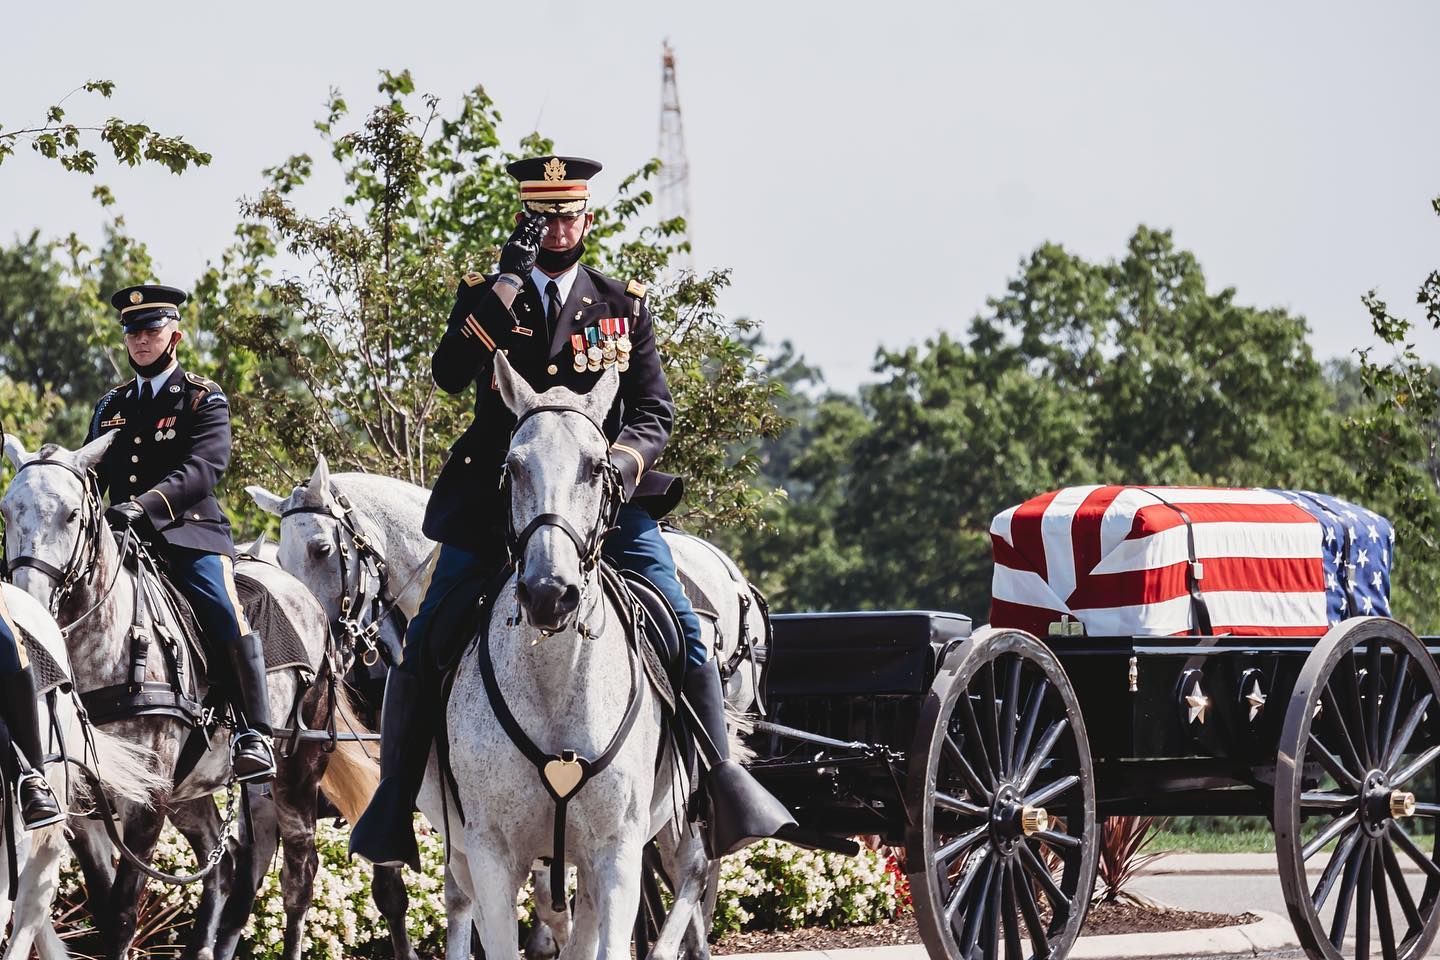 Chief Warrant Officer Sobataka of the 3rd U.S. Infantry Regiment (The Old Guard) Caisson Platoon conducted full military funeral honors with funeral escort for a veteran from the United States Air Force last week before conducting his final ride earlier this week.⠀
⠀
Full honors were given to this member of the USAF with the Washington Monument shining in the background.